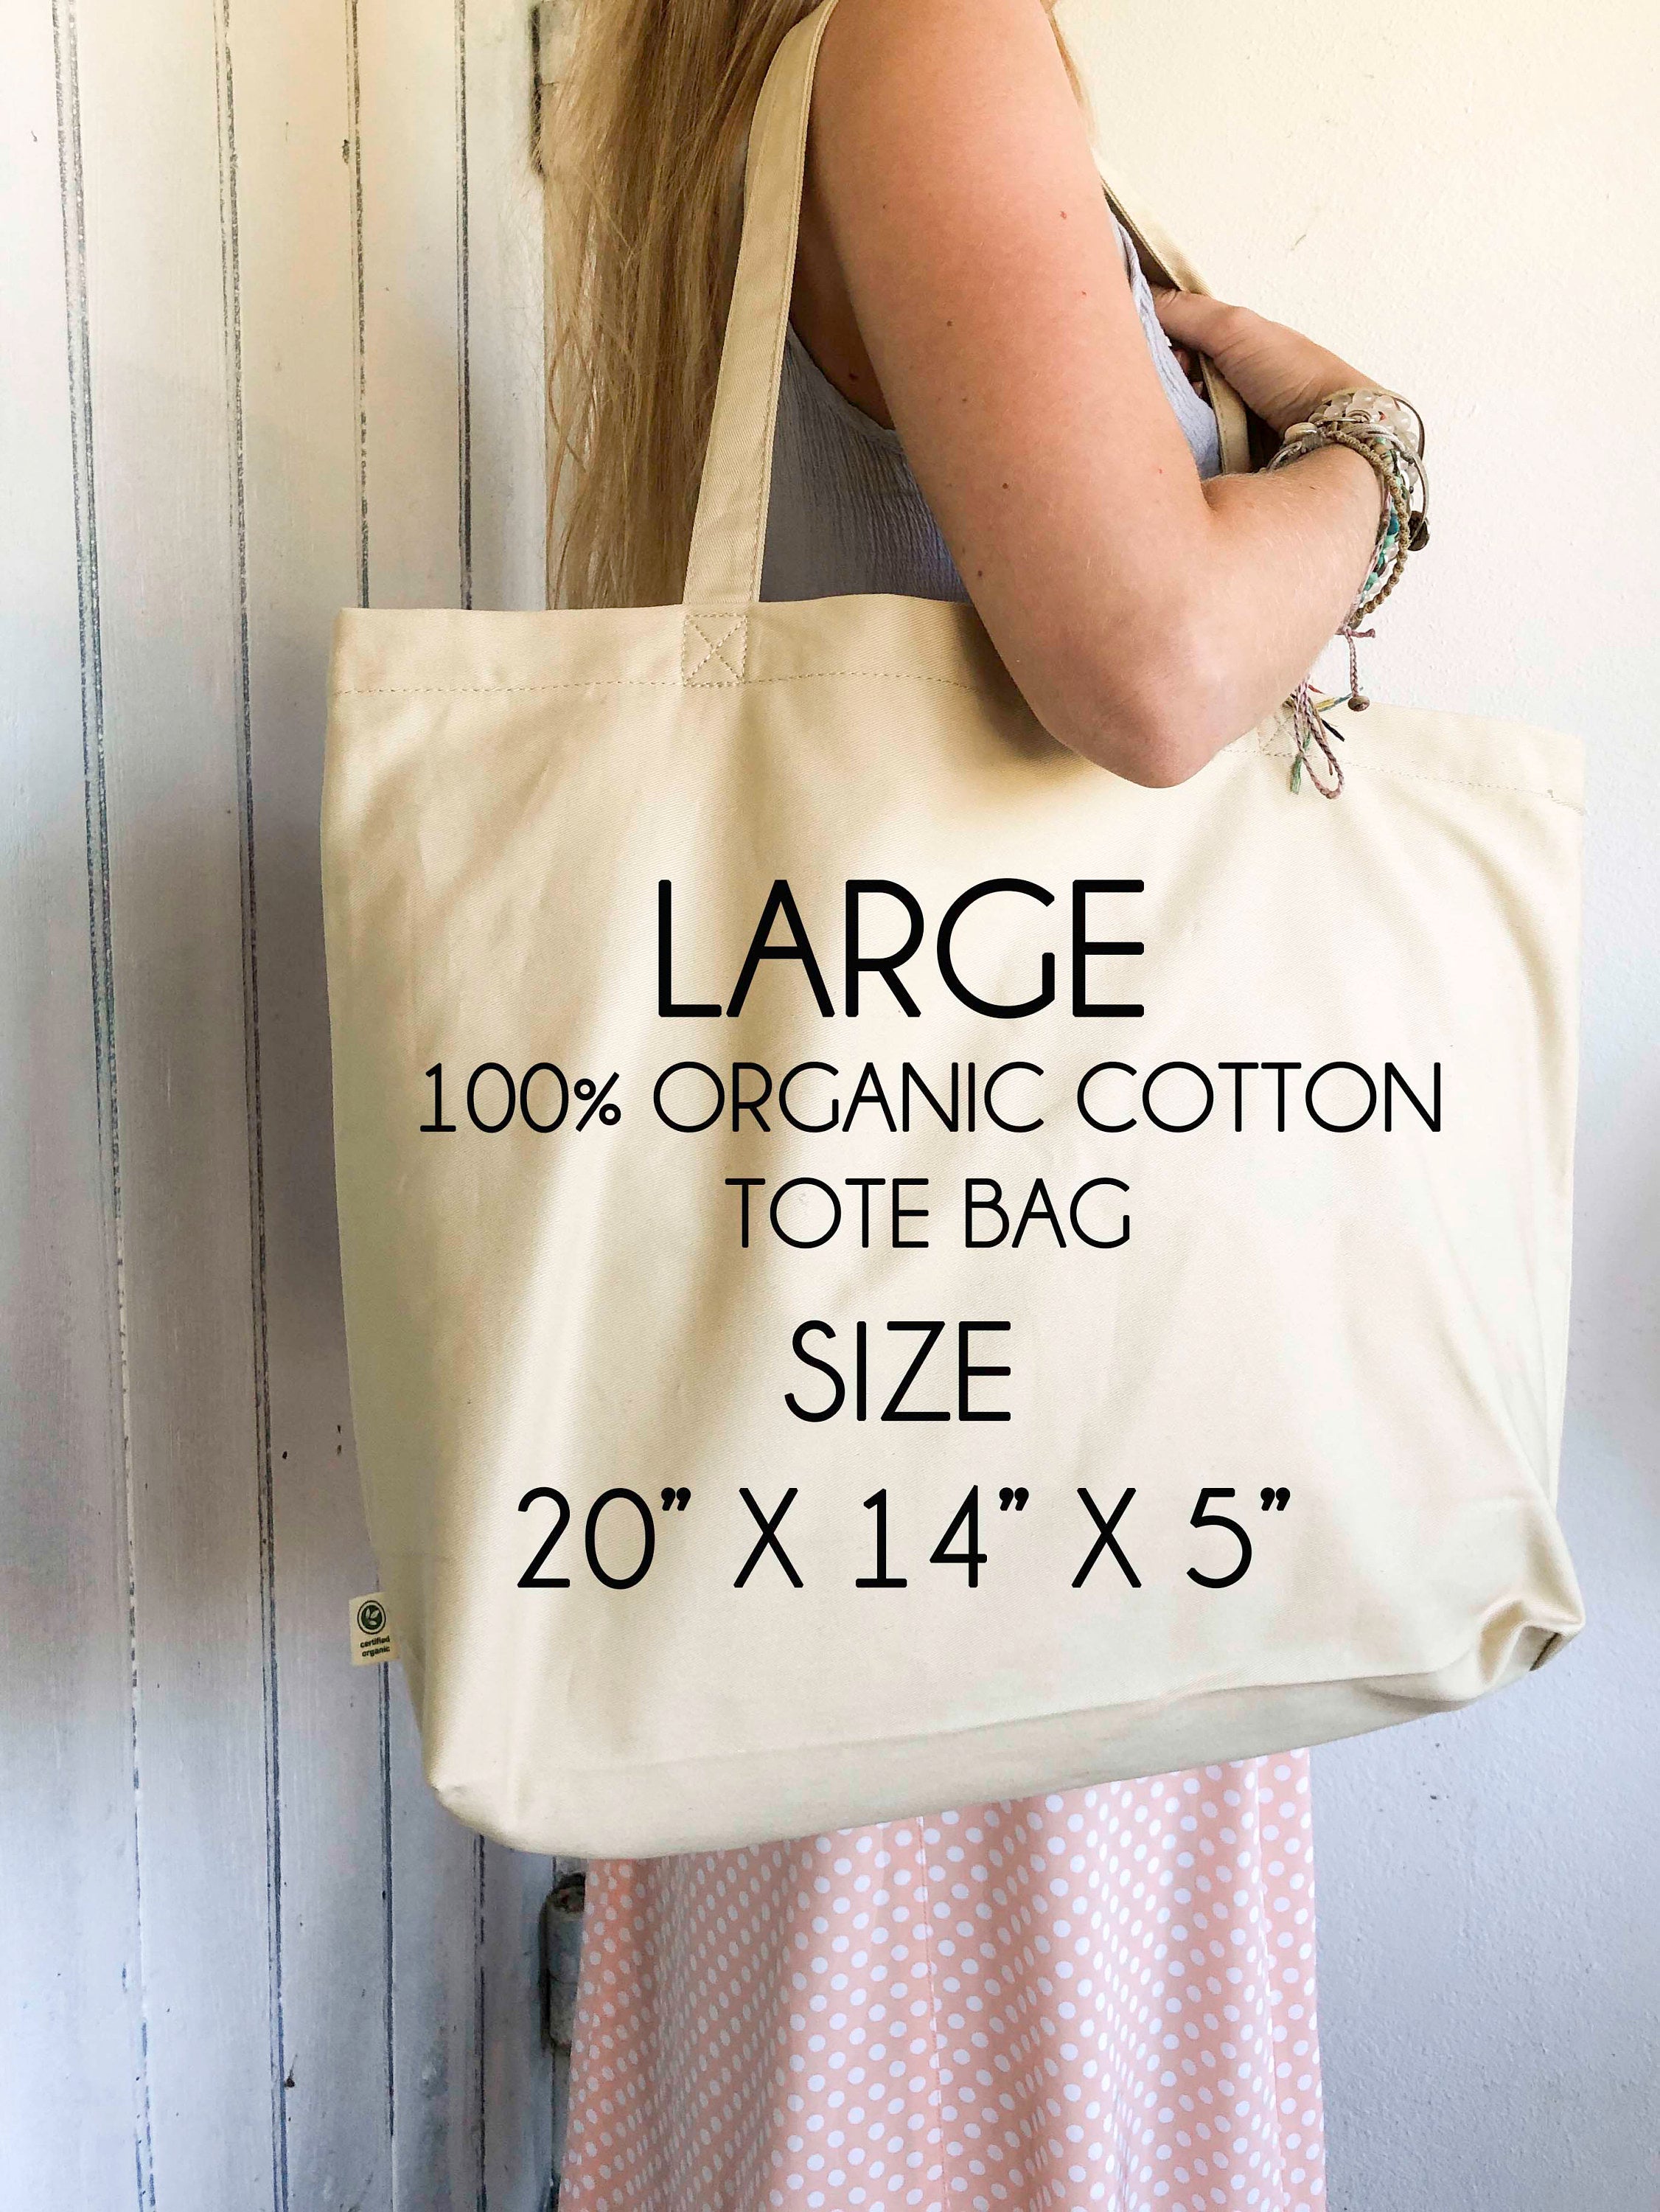 Not All Who Wander Organic Cotton Large Tote Bag, Inspirational Travel Quote Canvas Tote - BookQuoteDecor